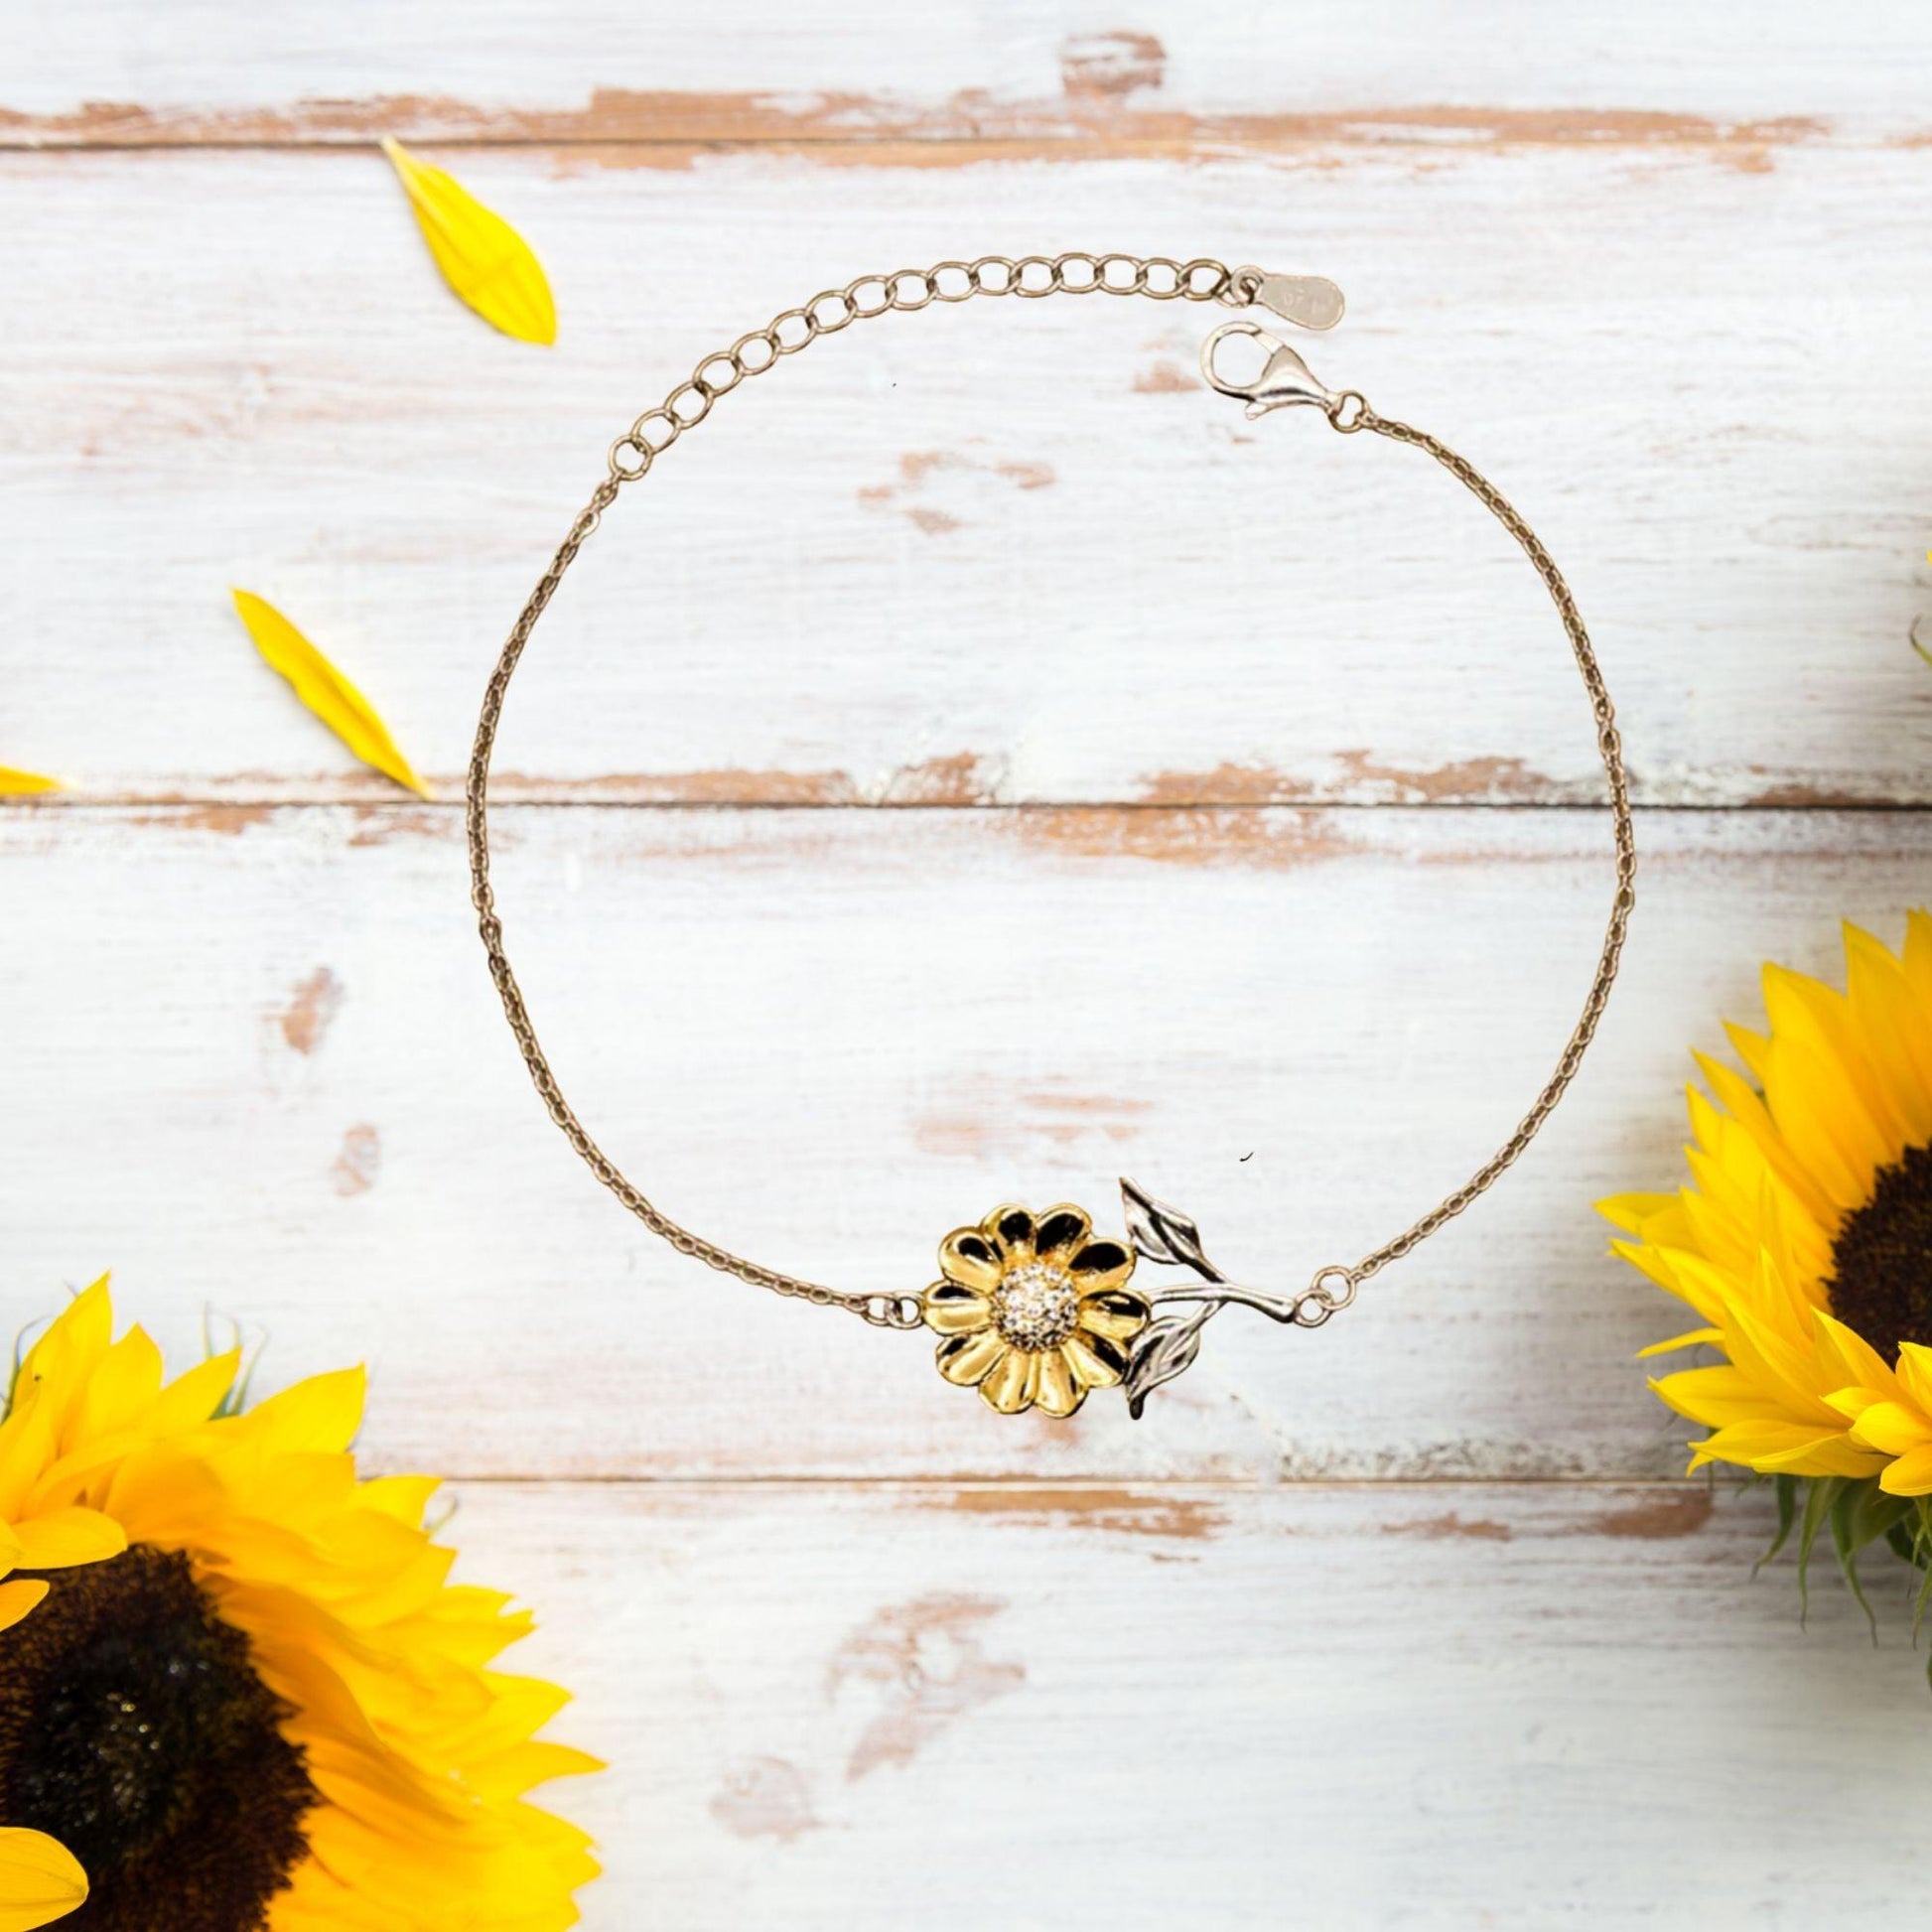 Remarkable Insurance Sales Agent Gifts, Your dedication and hard work, Inspirational Birthday Christmas Unique Sunflower Bracelet For Insurance Sales Agent, Coworkers, Men, Women, Friends - Mallard Moon Gift Shop